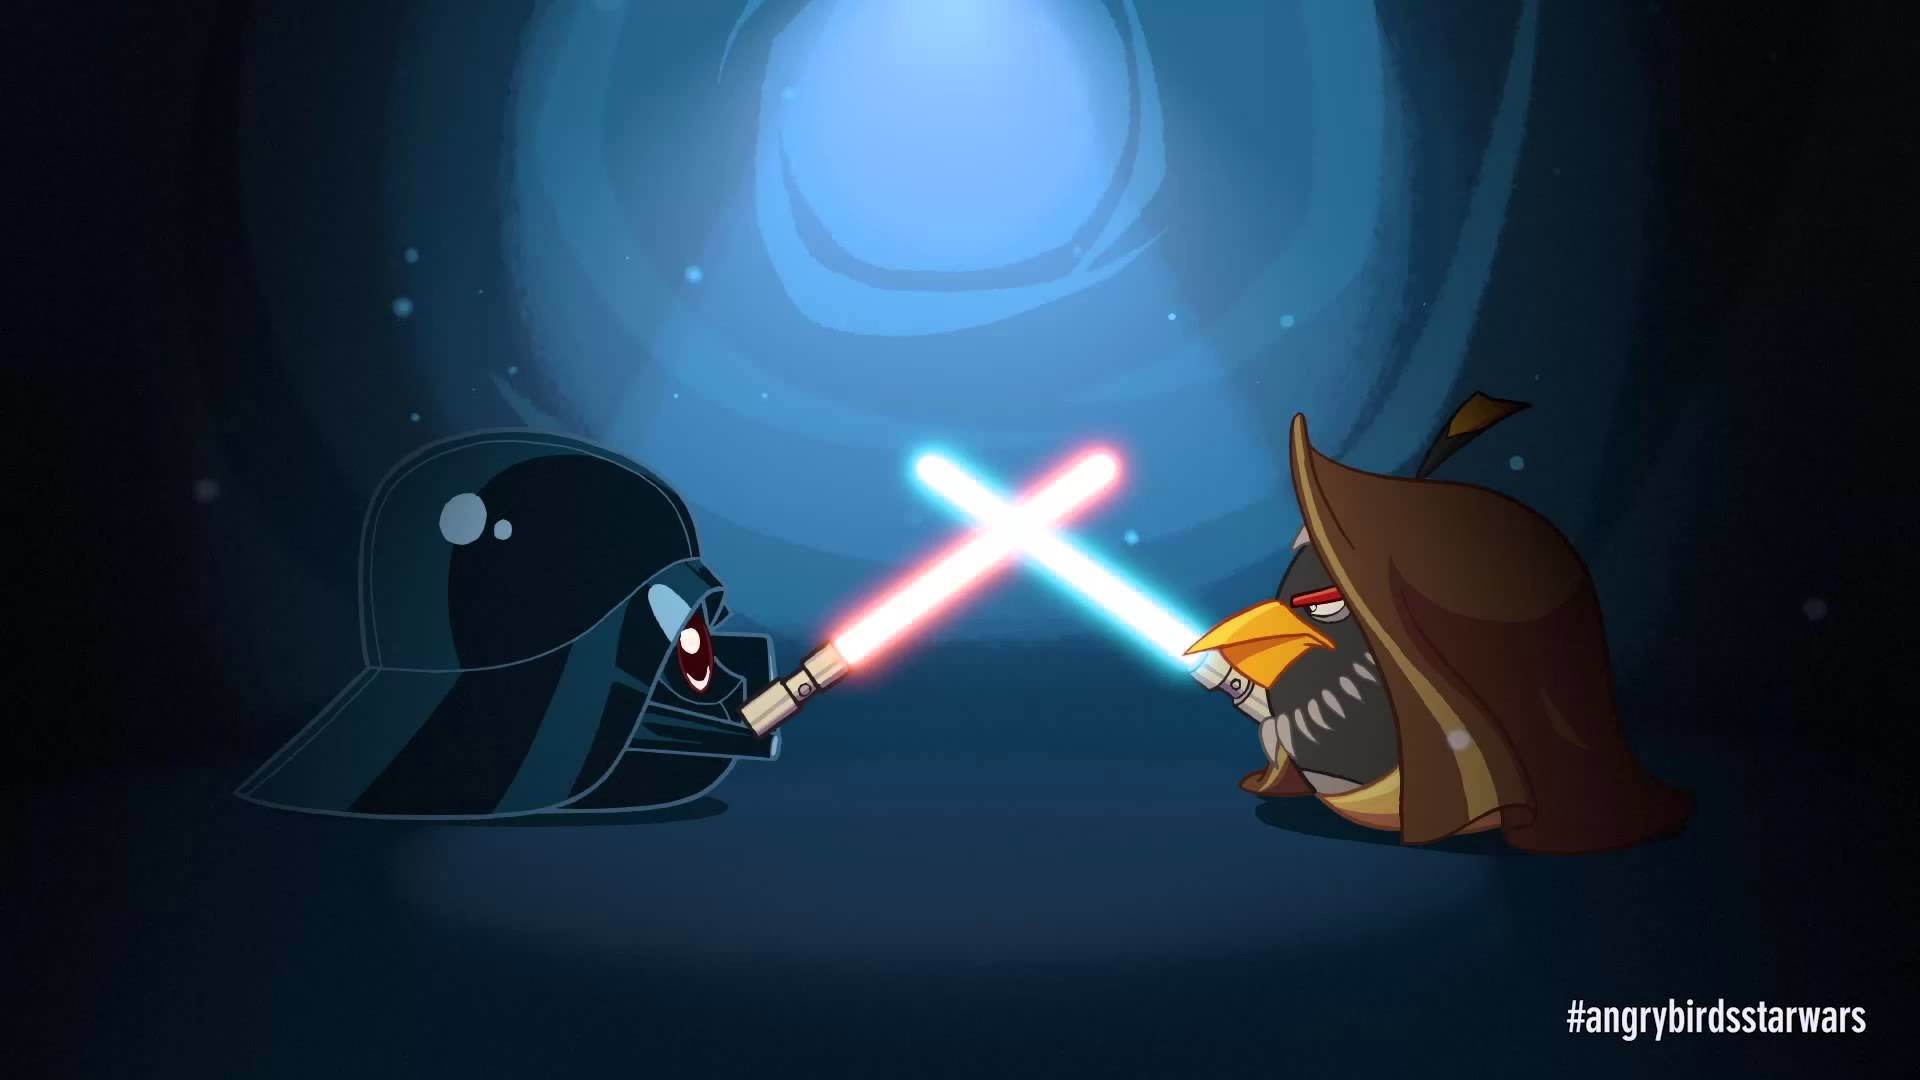 1920x1080 Angry Birds Star Wars: Obi Wan & Darth Vader - Exclusive Gameplay - YouTube